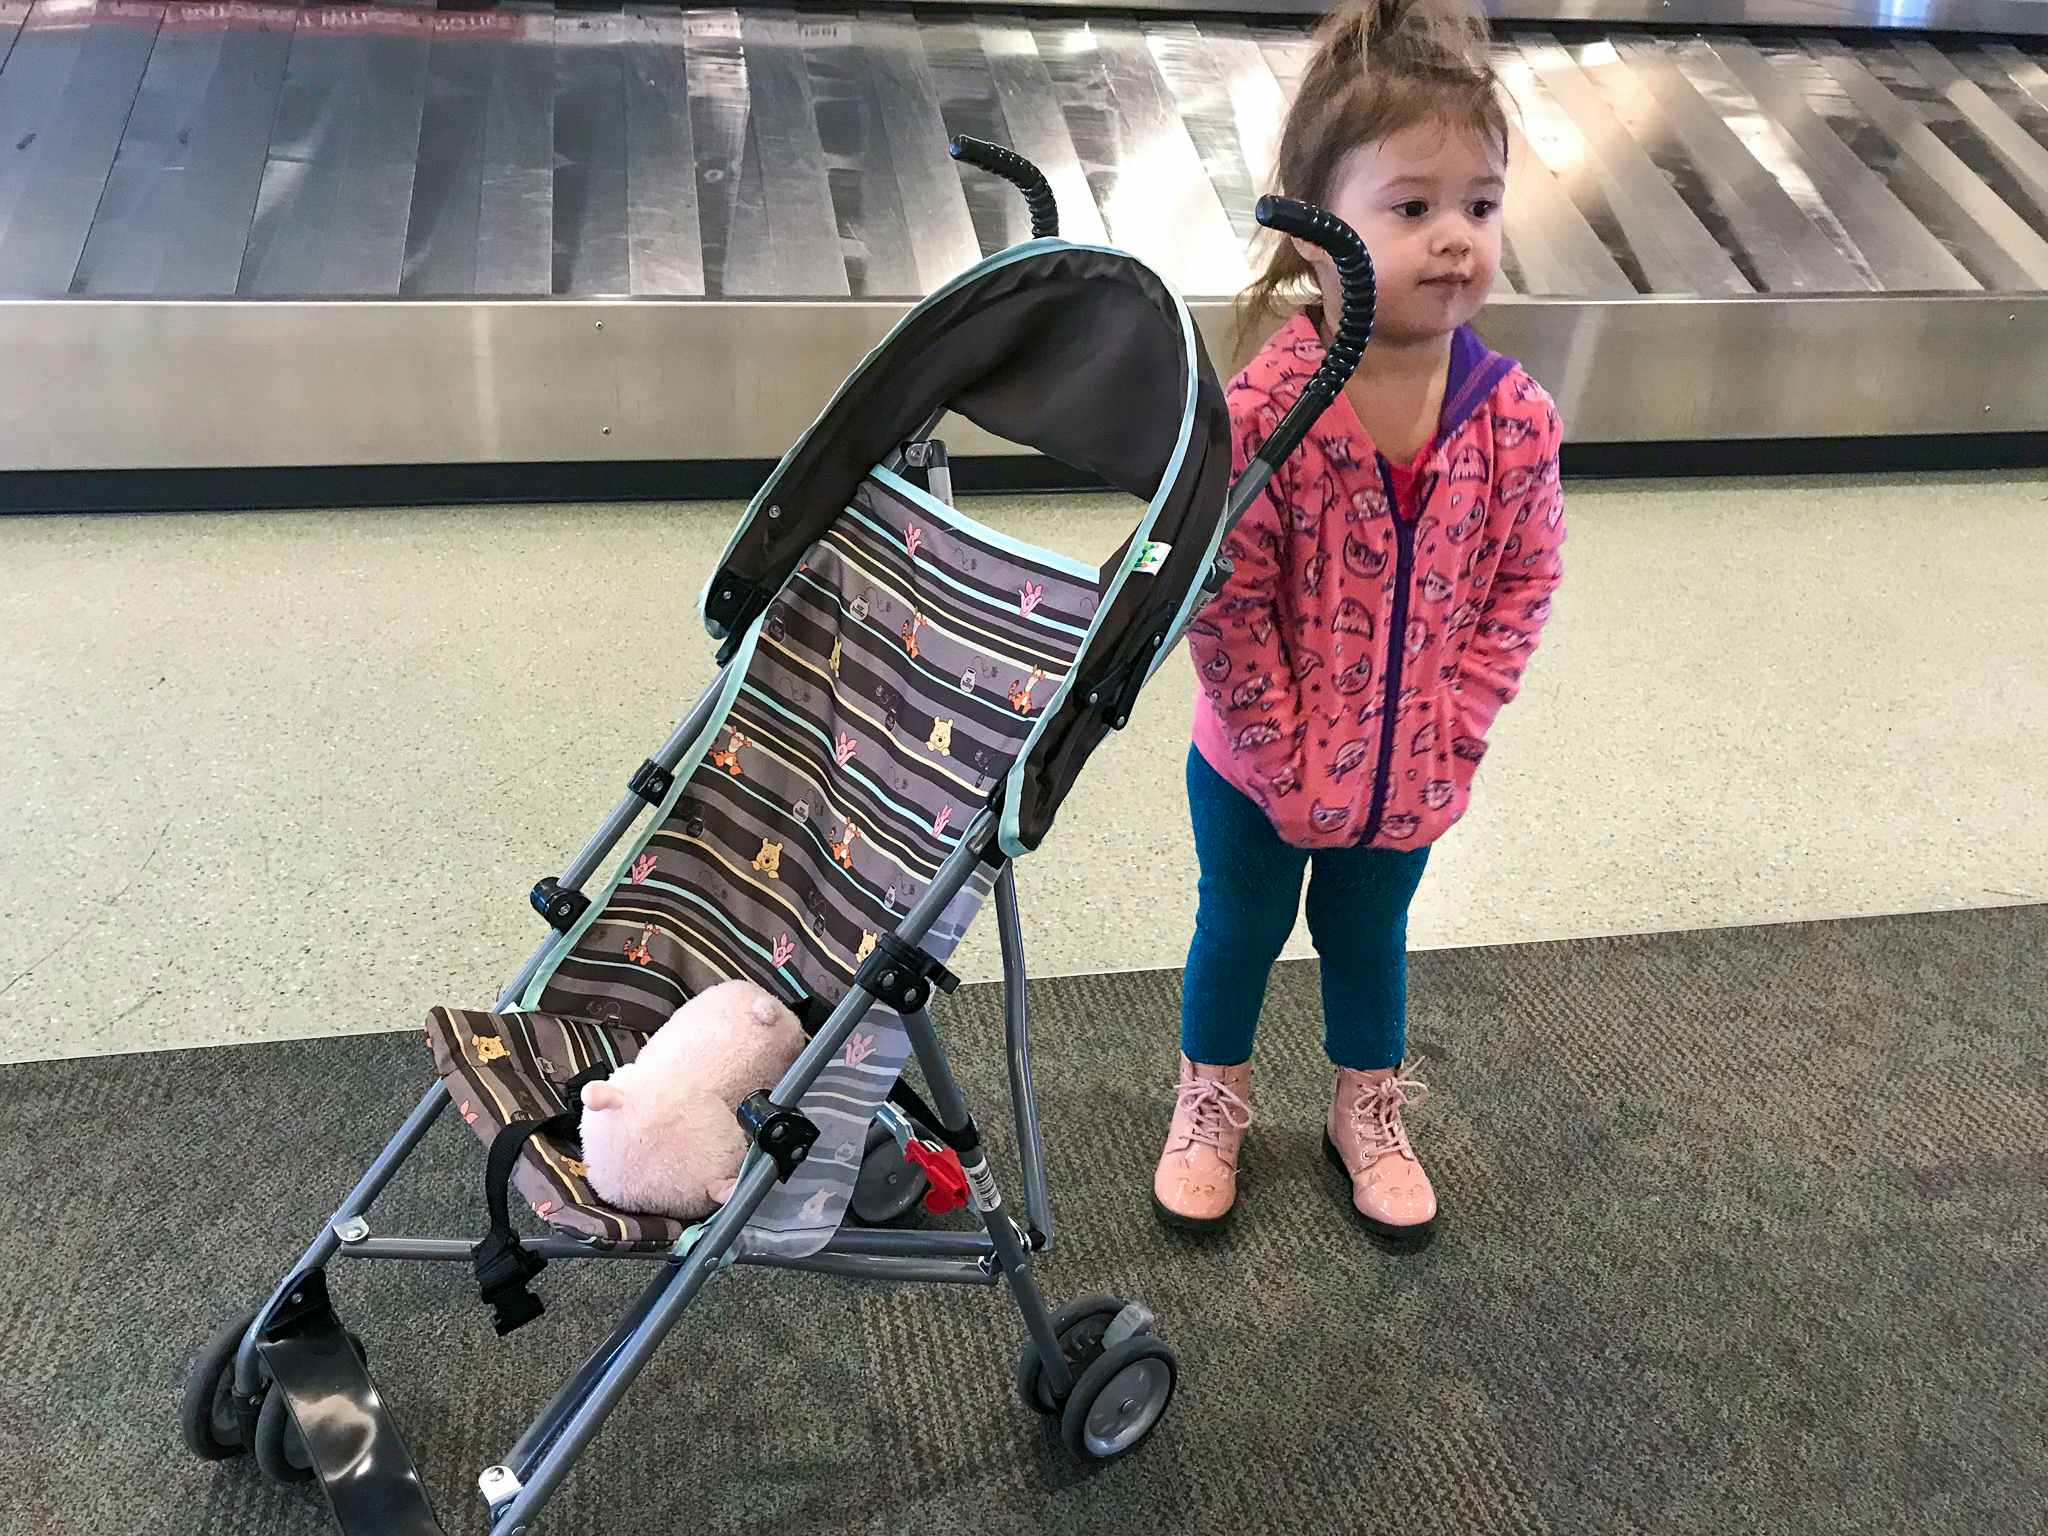 a little girl standing next to a stroller in an airport